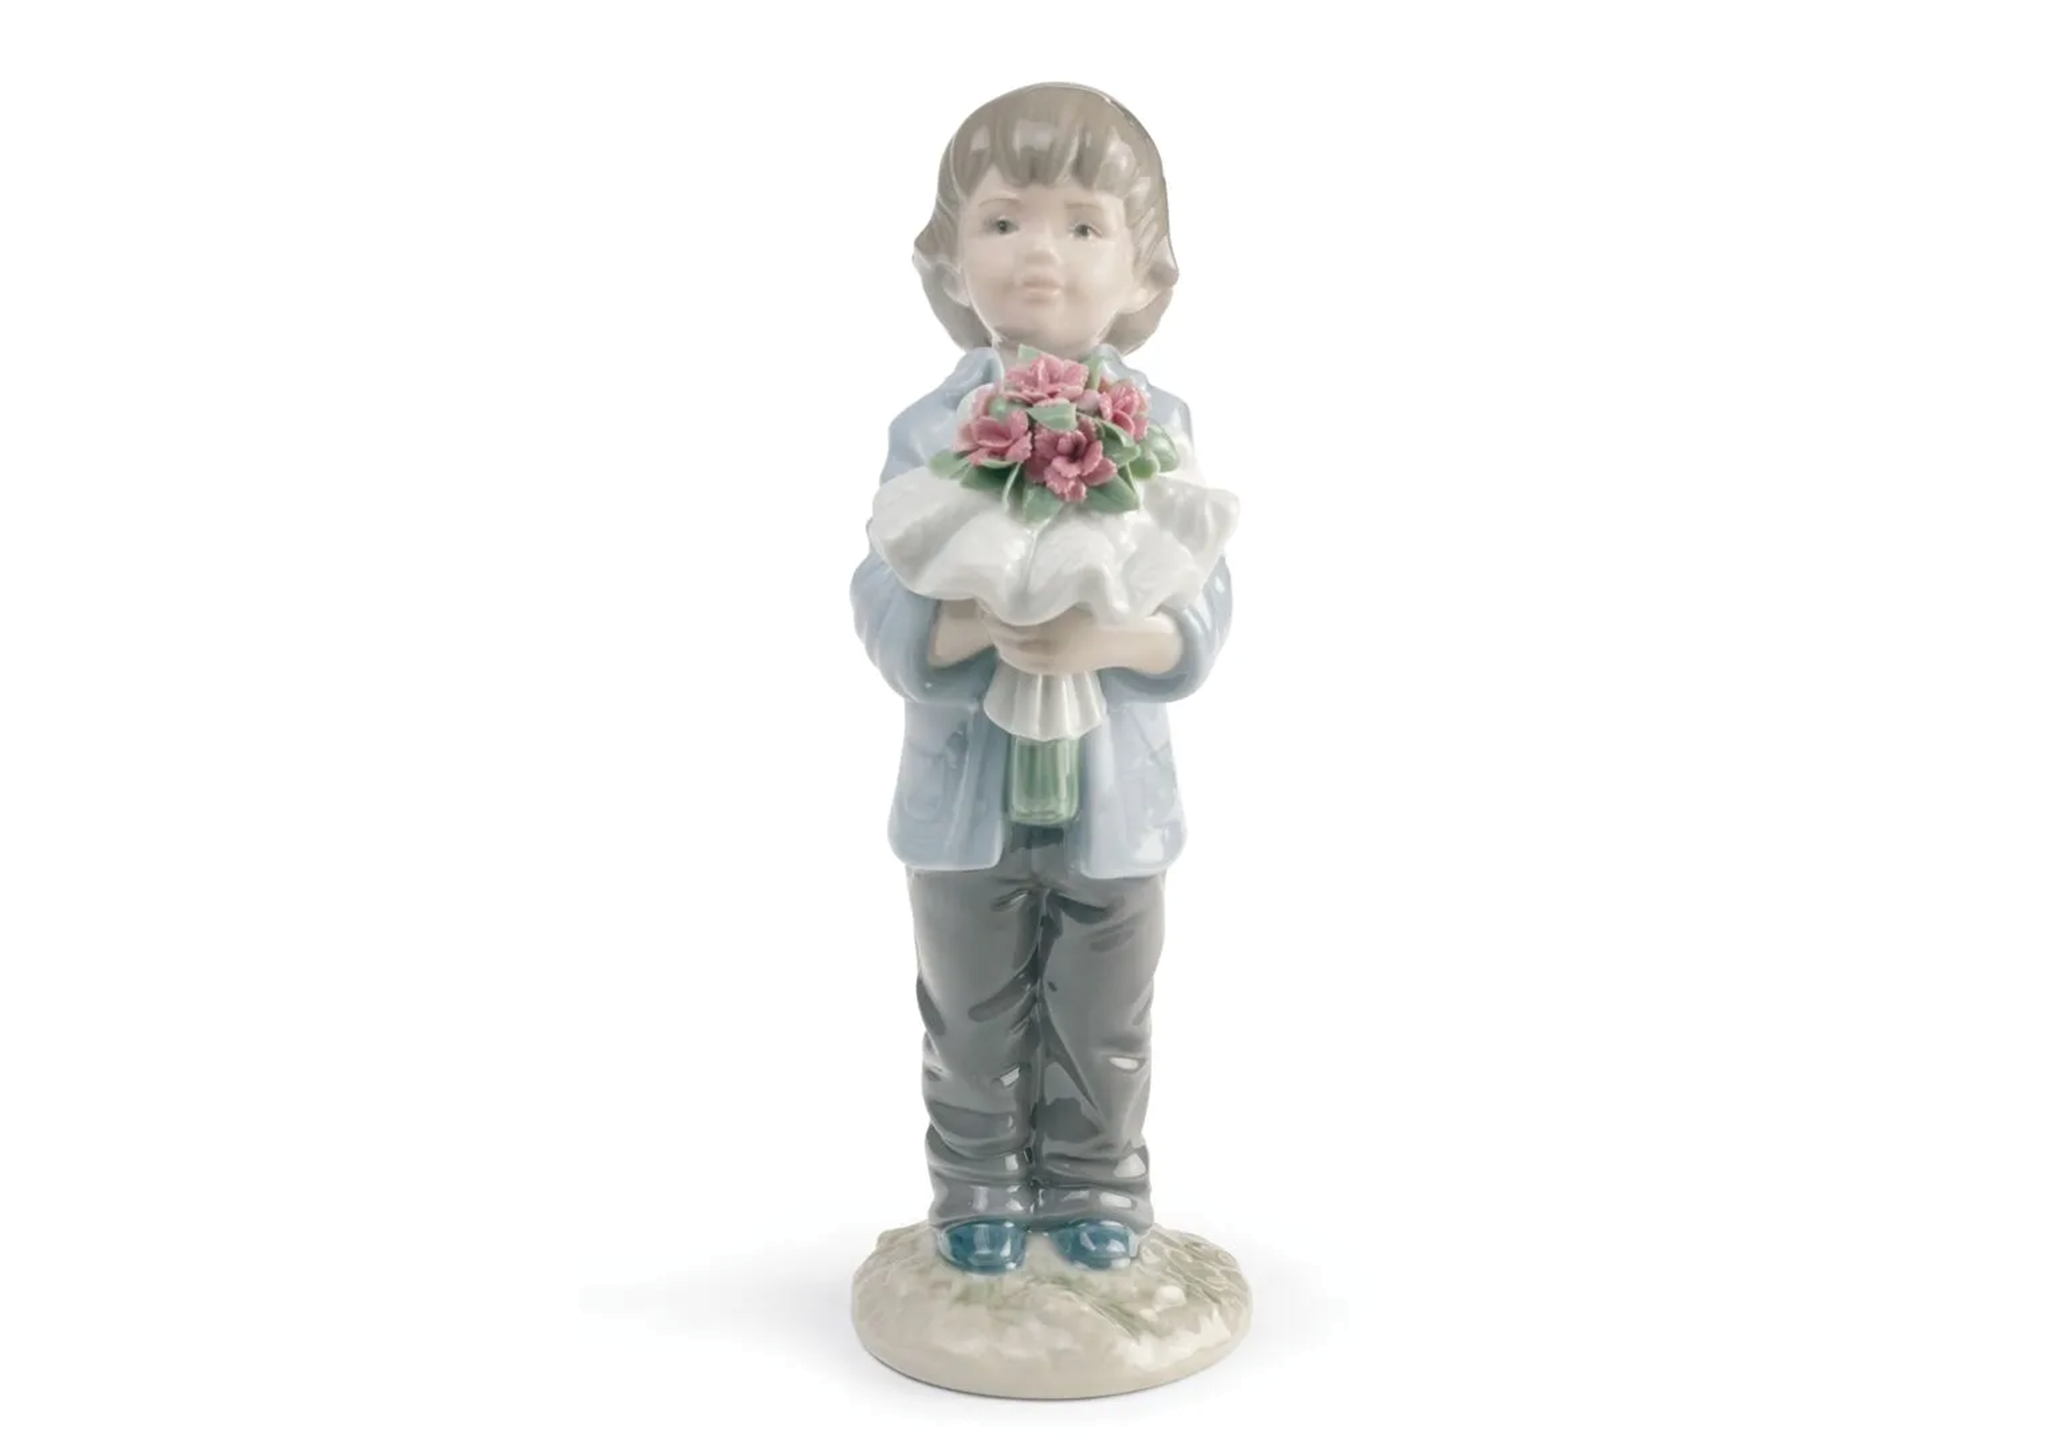 Lladro You Deserve The Best Boy by Lladro